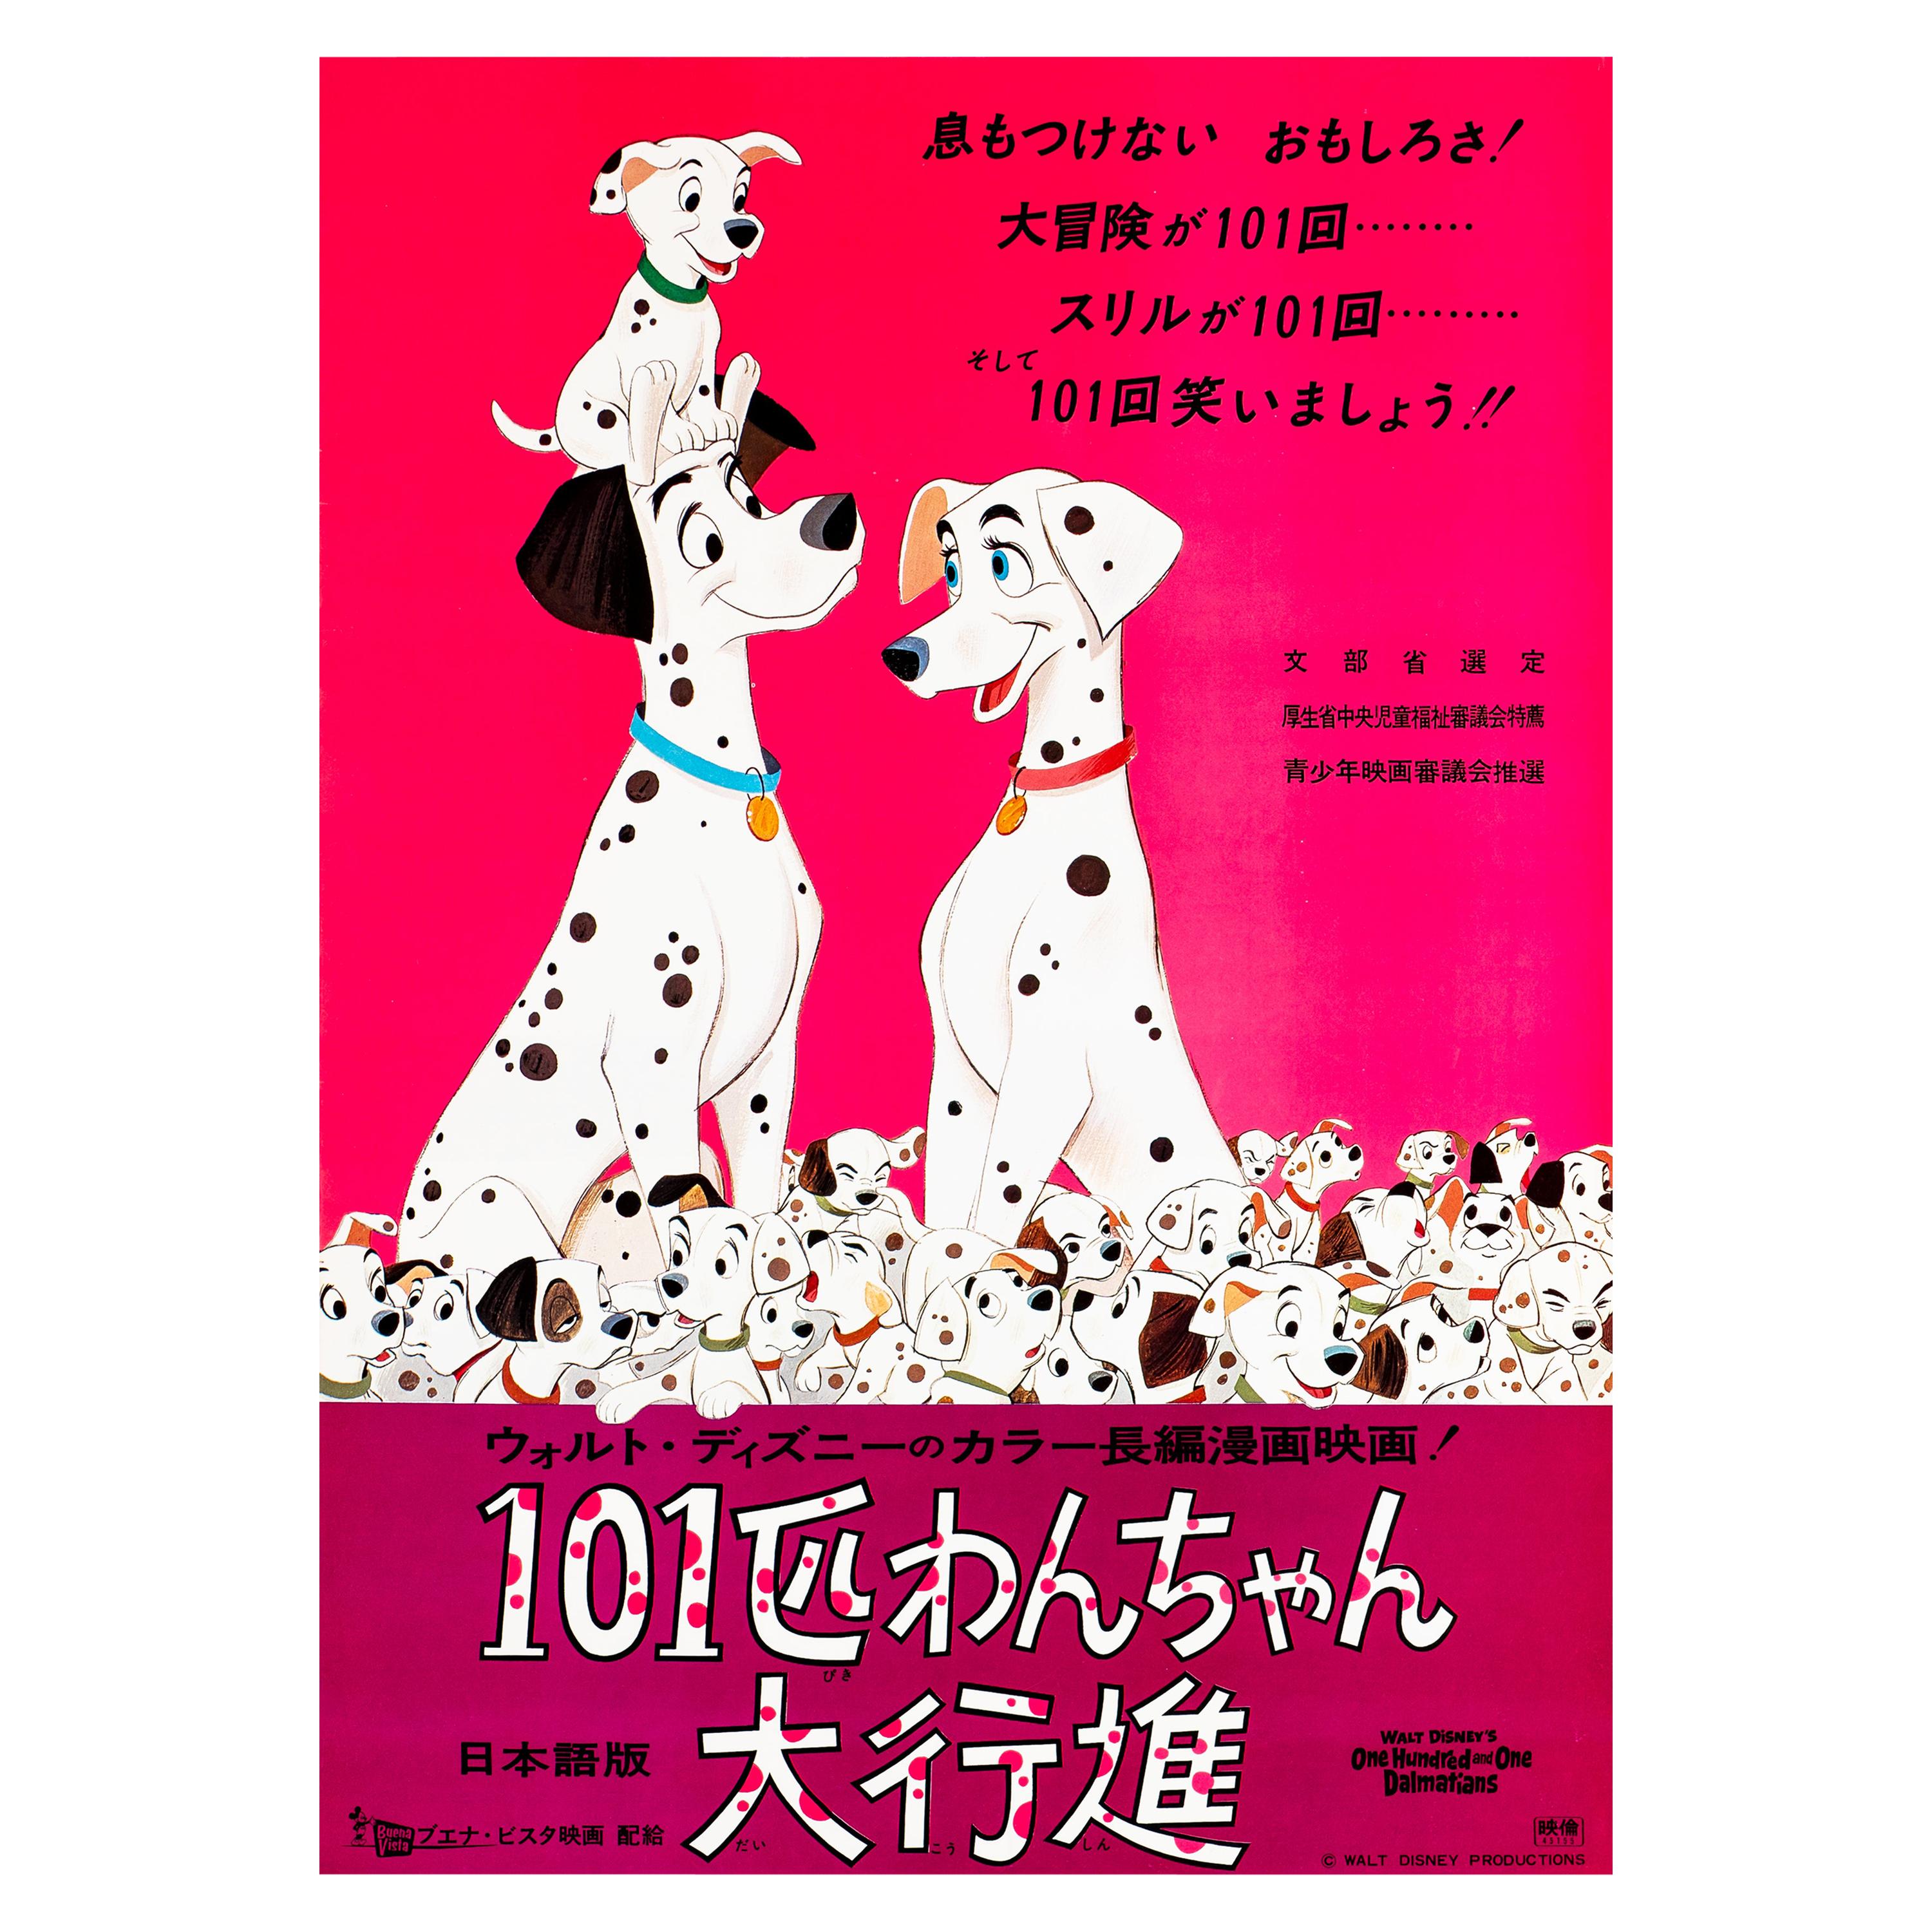 'One Hundred and One Dalmatians' Original Vintage Movie Poster, Japanese, 1970